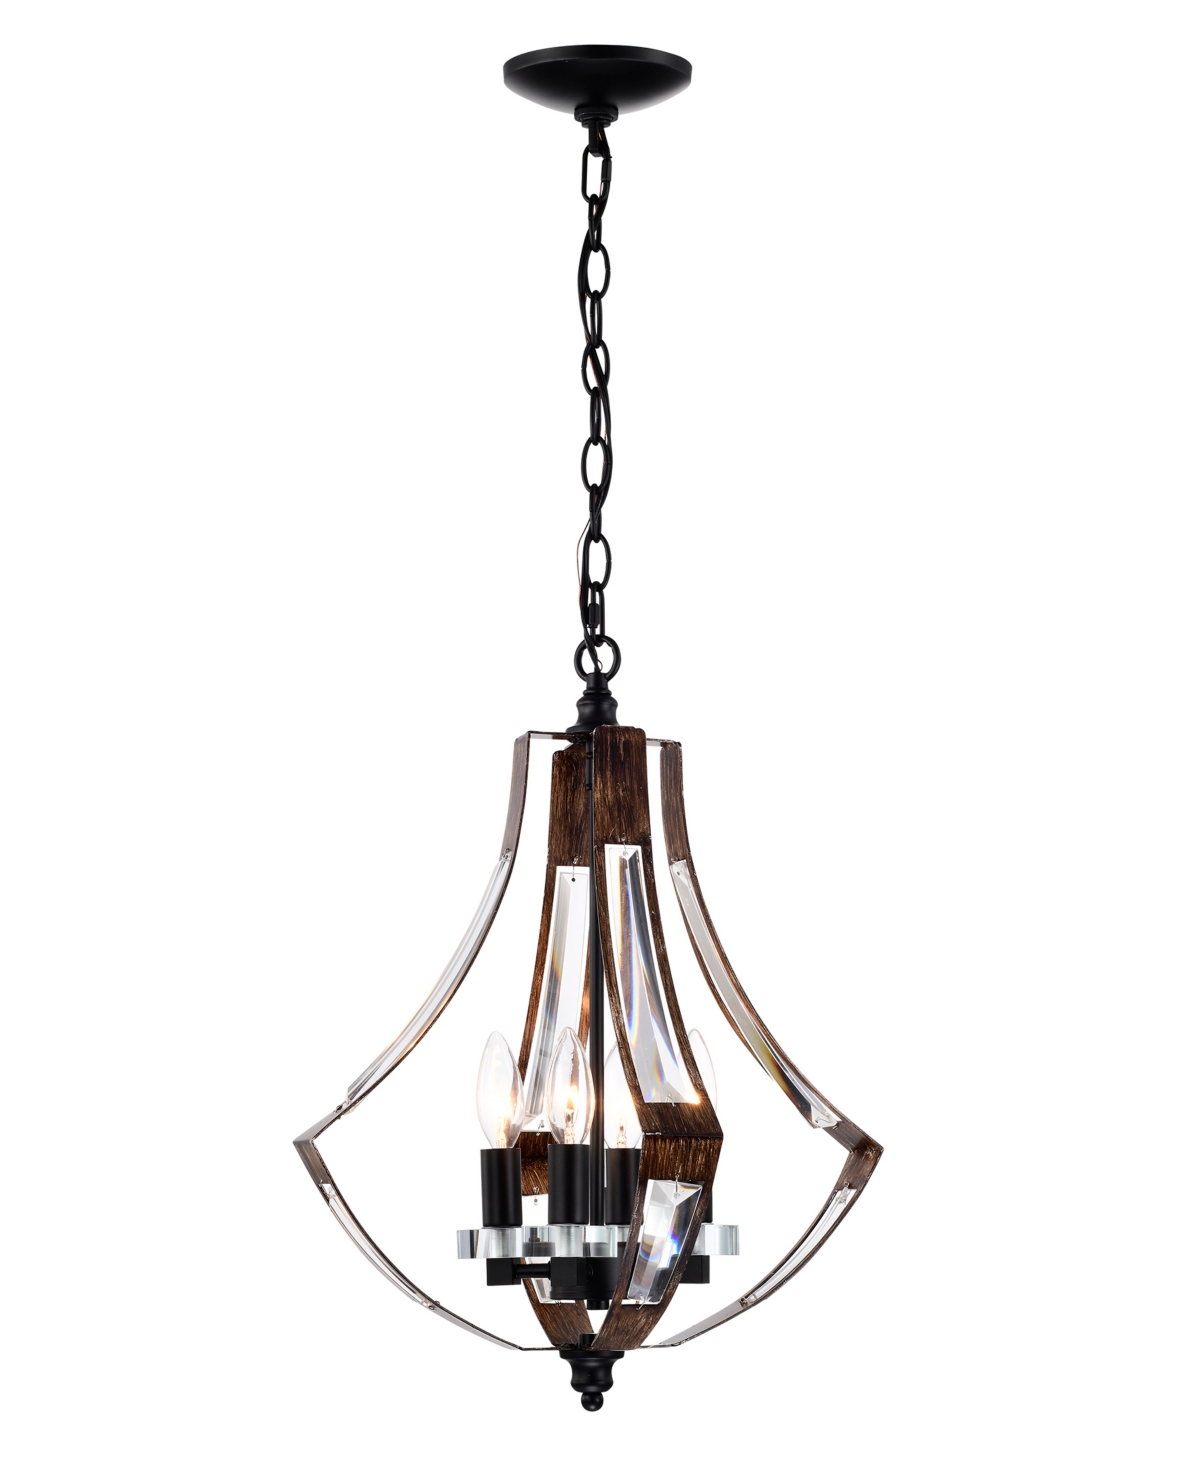 Home Accessories Fabiola 15" 4-light Indoor Chandelier With Light Kit In Matte Black And Faux Wood Grain